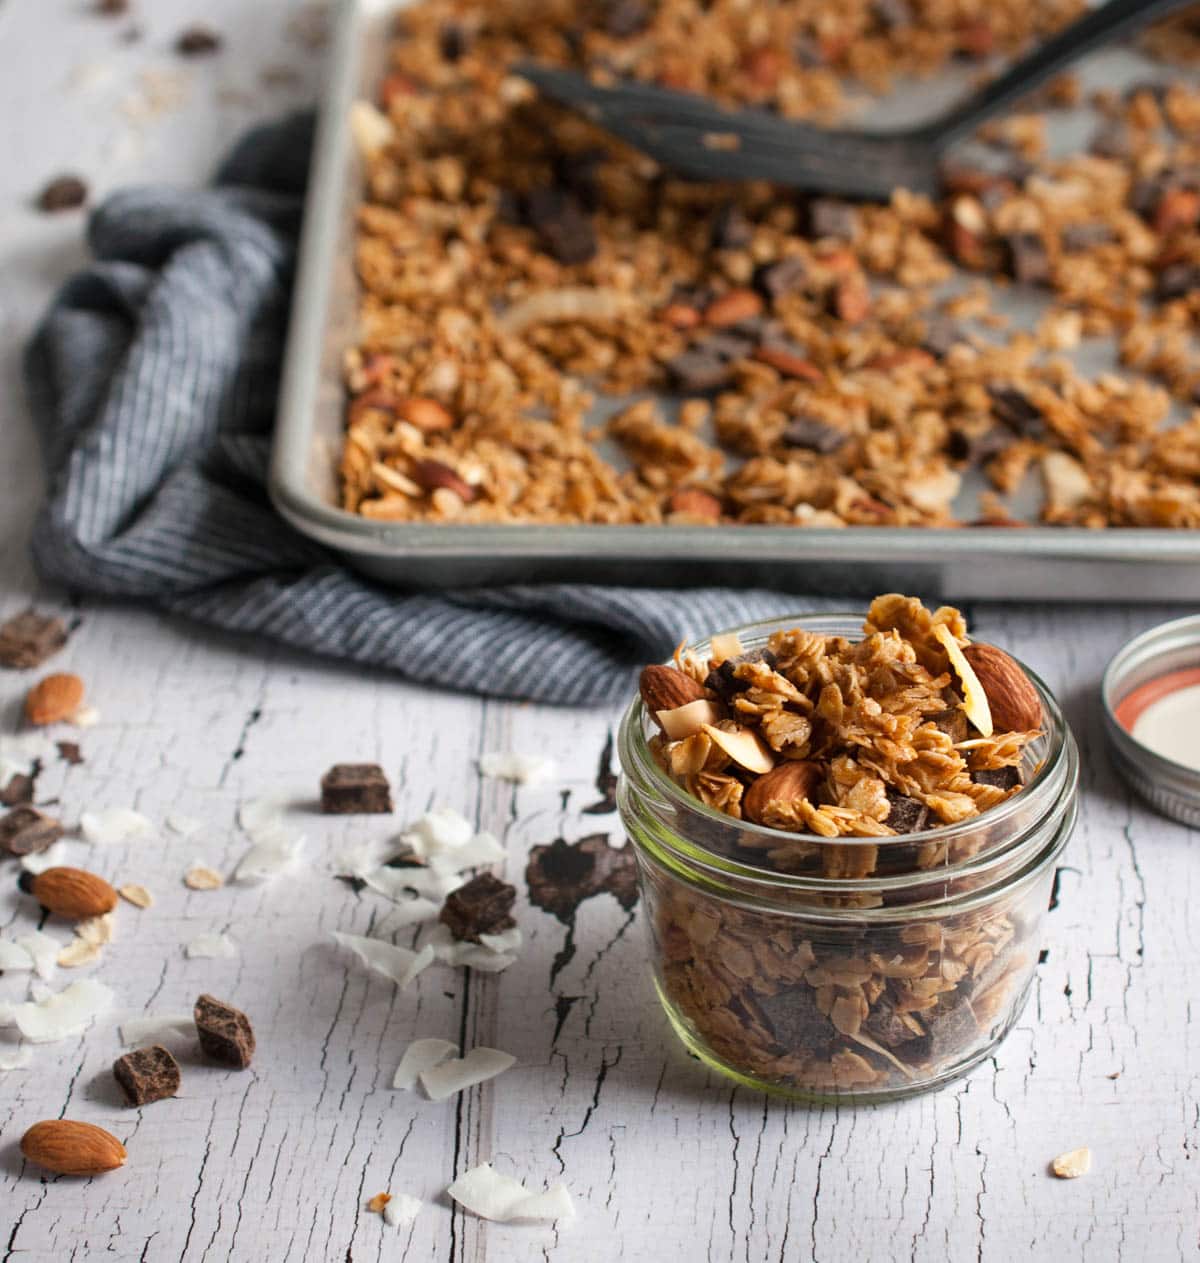 Crunchy chocolate coconut granola with toasty almonds, coconut oil, honey, and a dash of cinnamon to make your breakfast the best meal of the day.